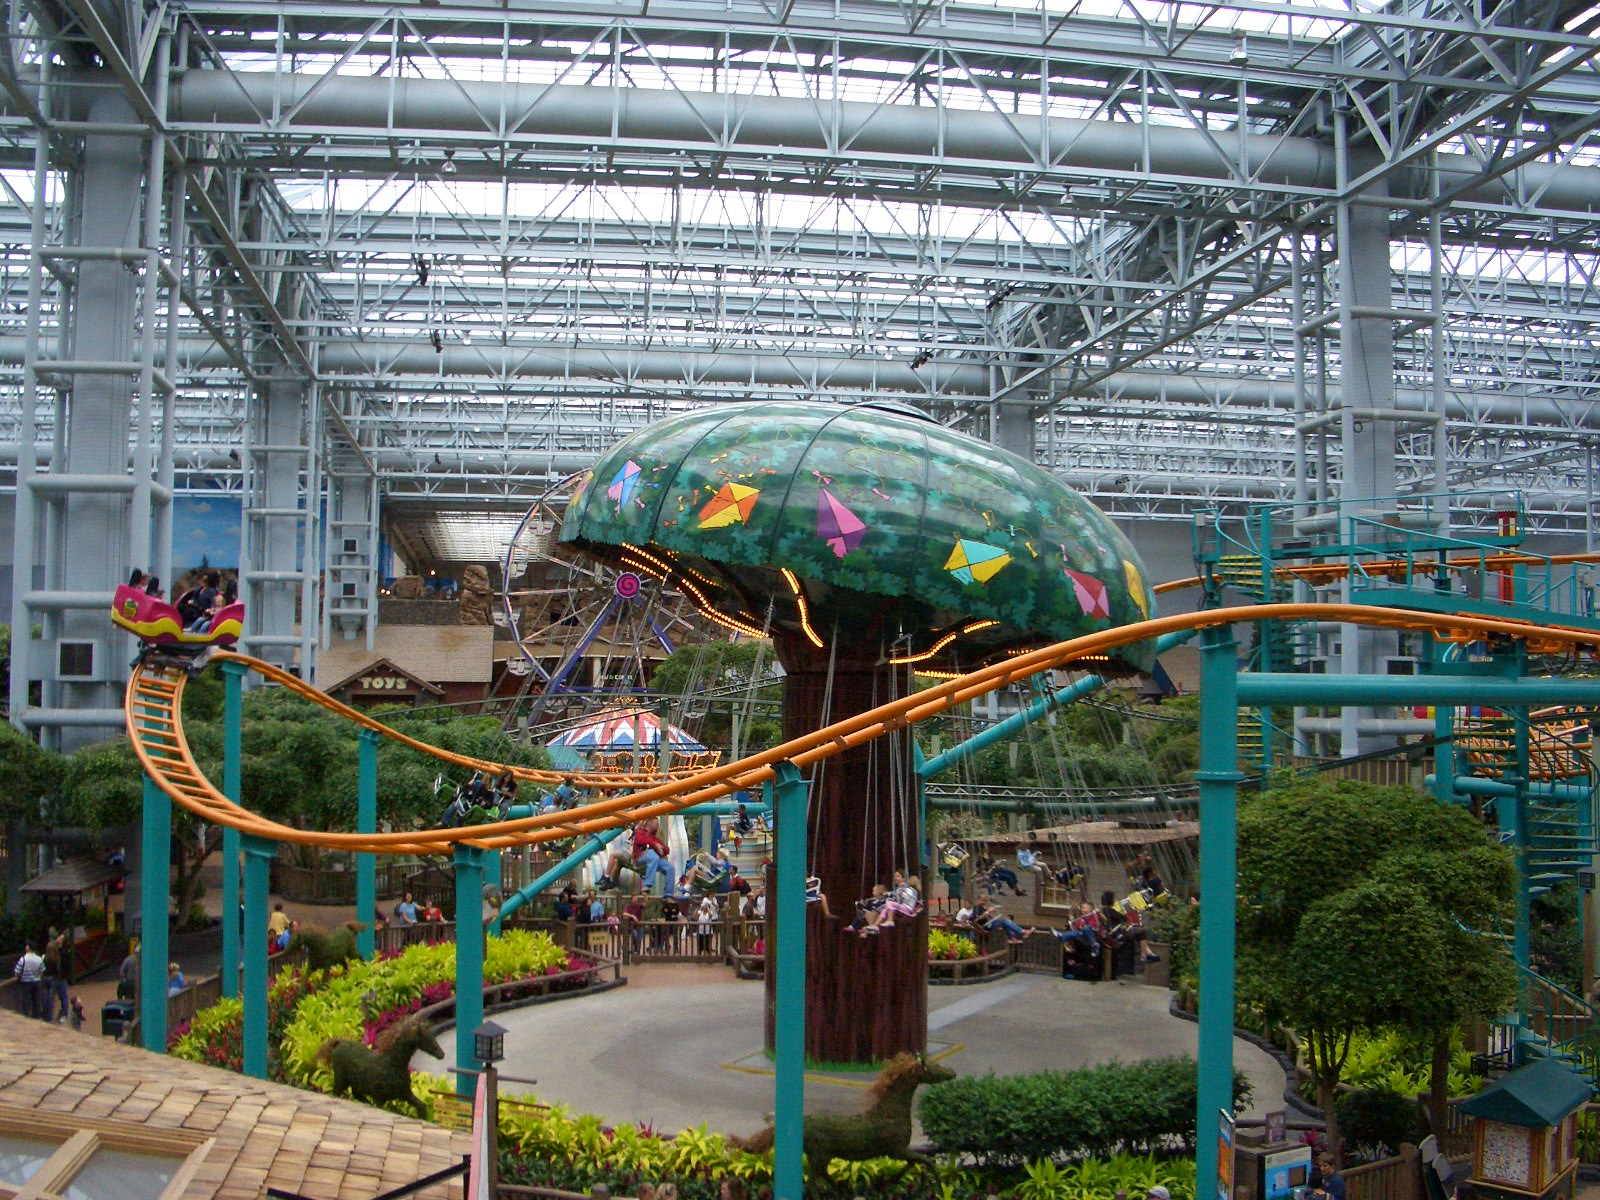 Mall of America  Camp Snoopy / LvEXk[s[